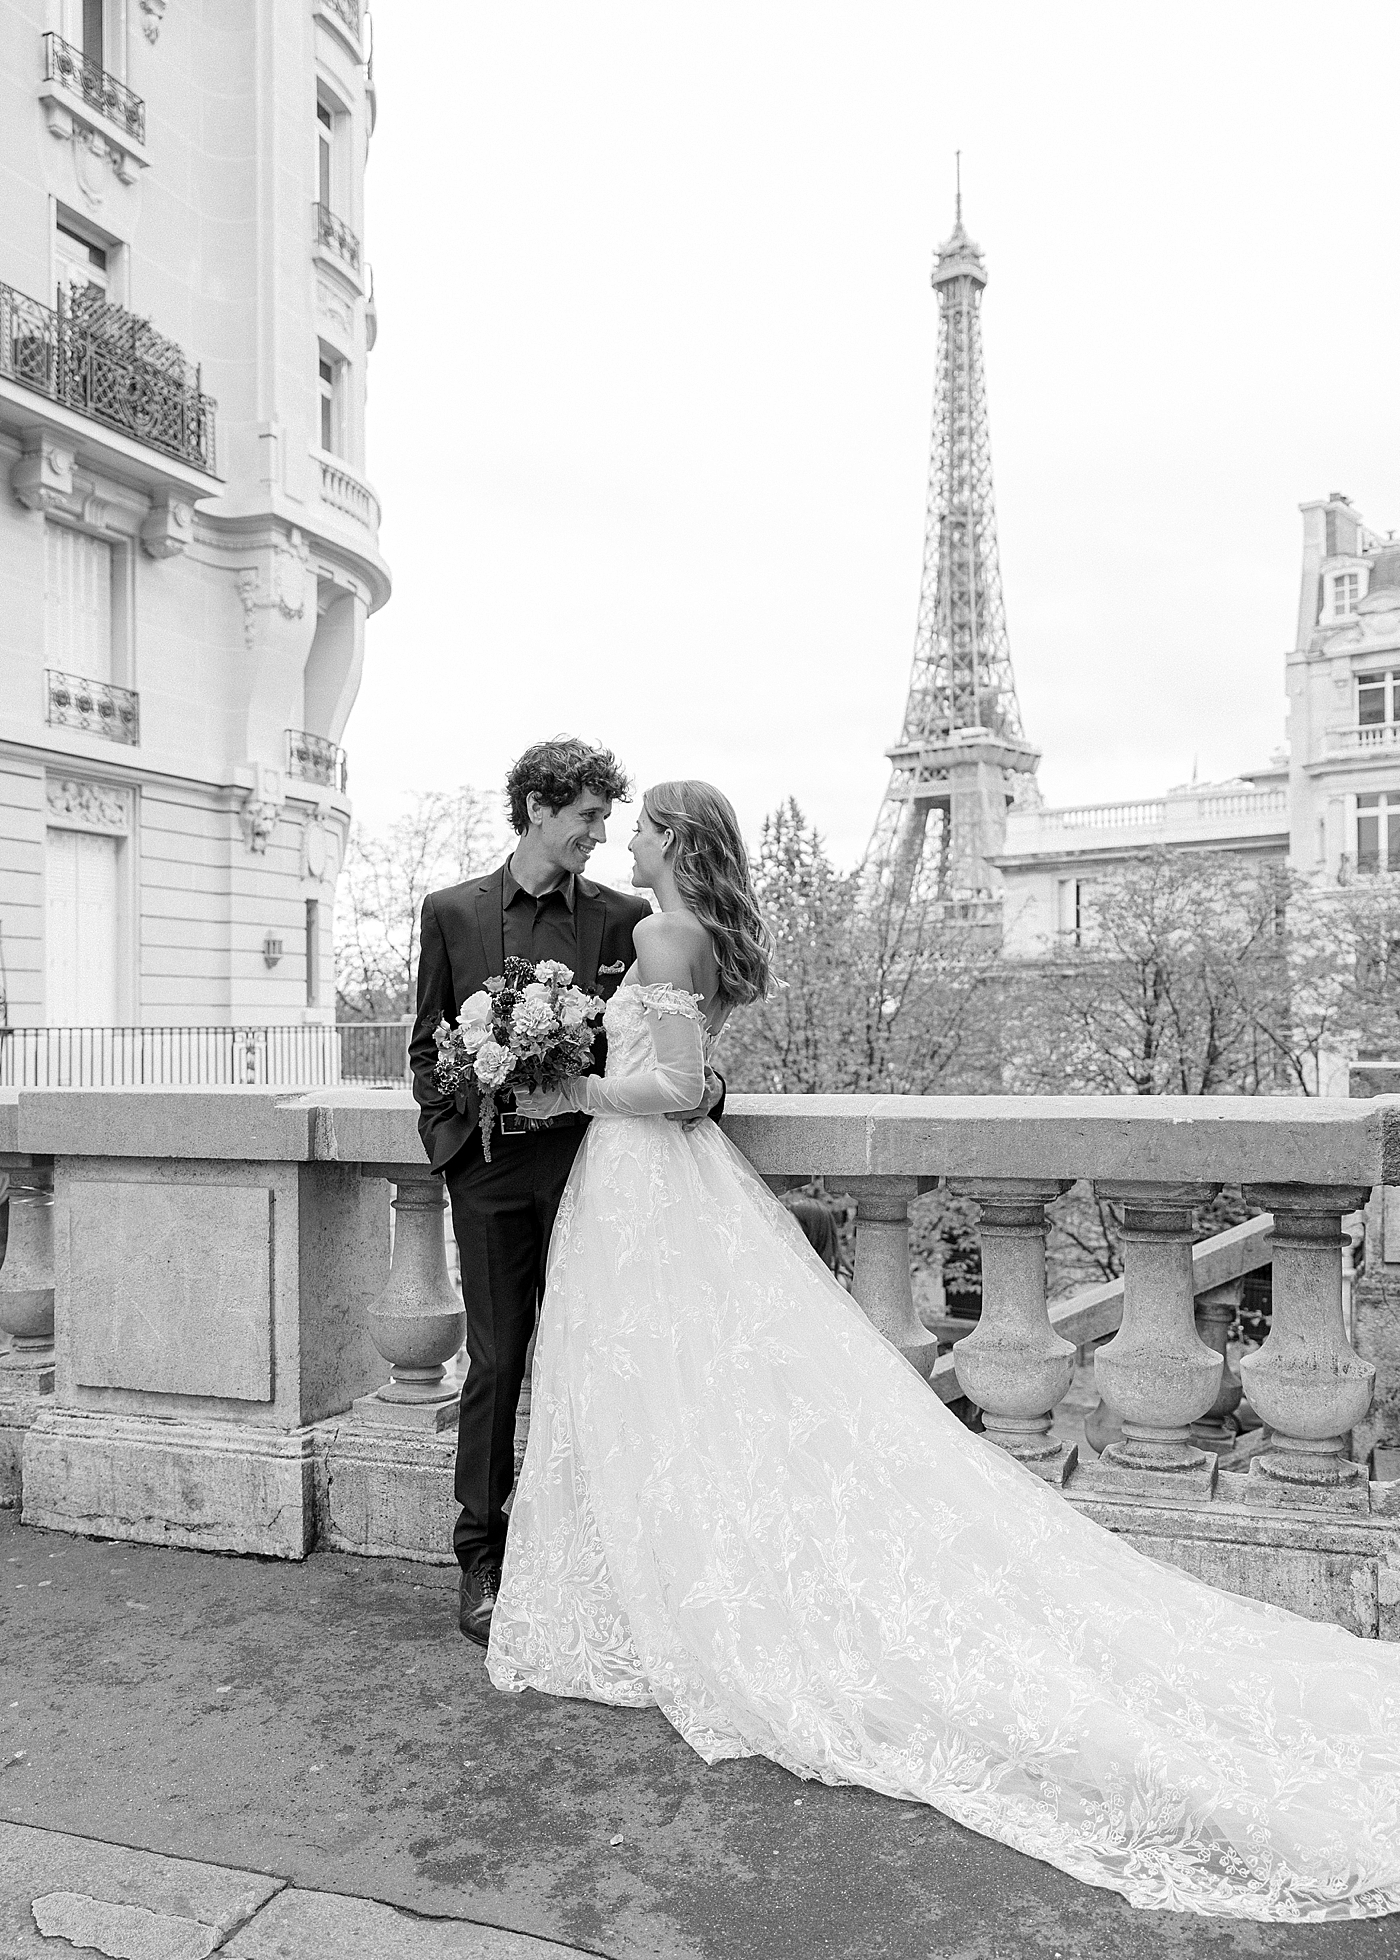 Black and white image of a bride and groom embracing in Paris with the Eiffel tower in the background | Image by Hope Helmuth Photography